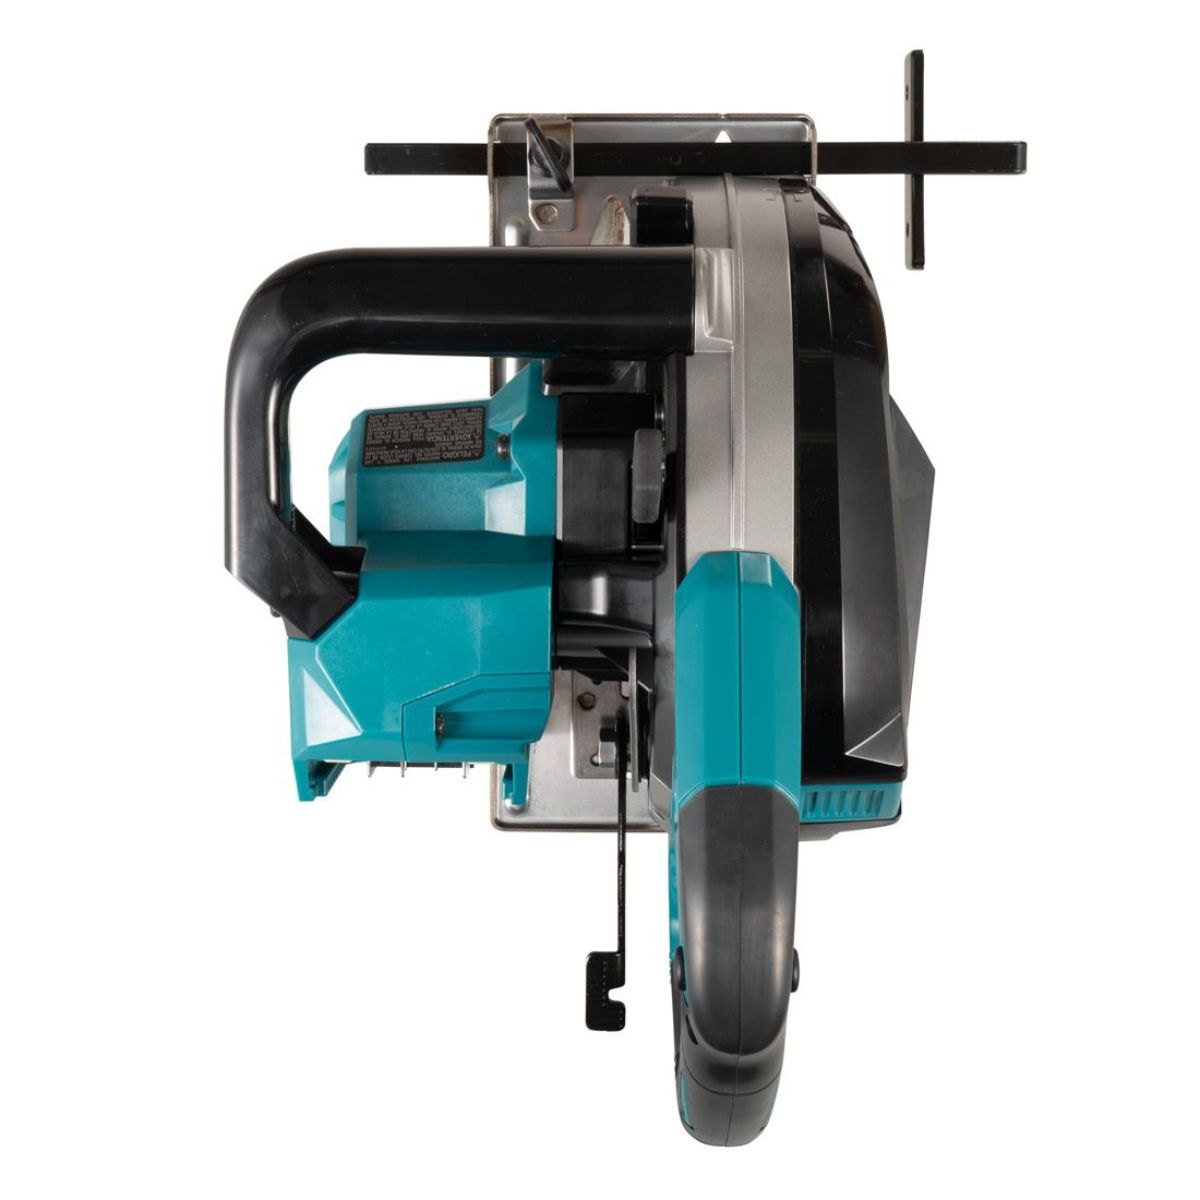 Makita CS002GZ01 40V Max XGT 185mm Brushless Metal Cutter Saw With Type 4 Case